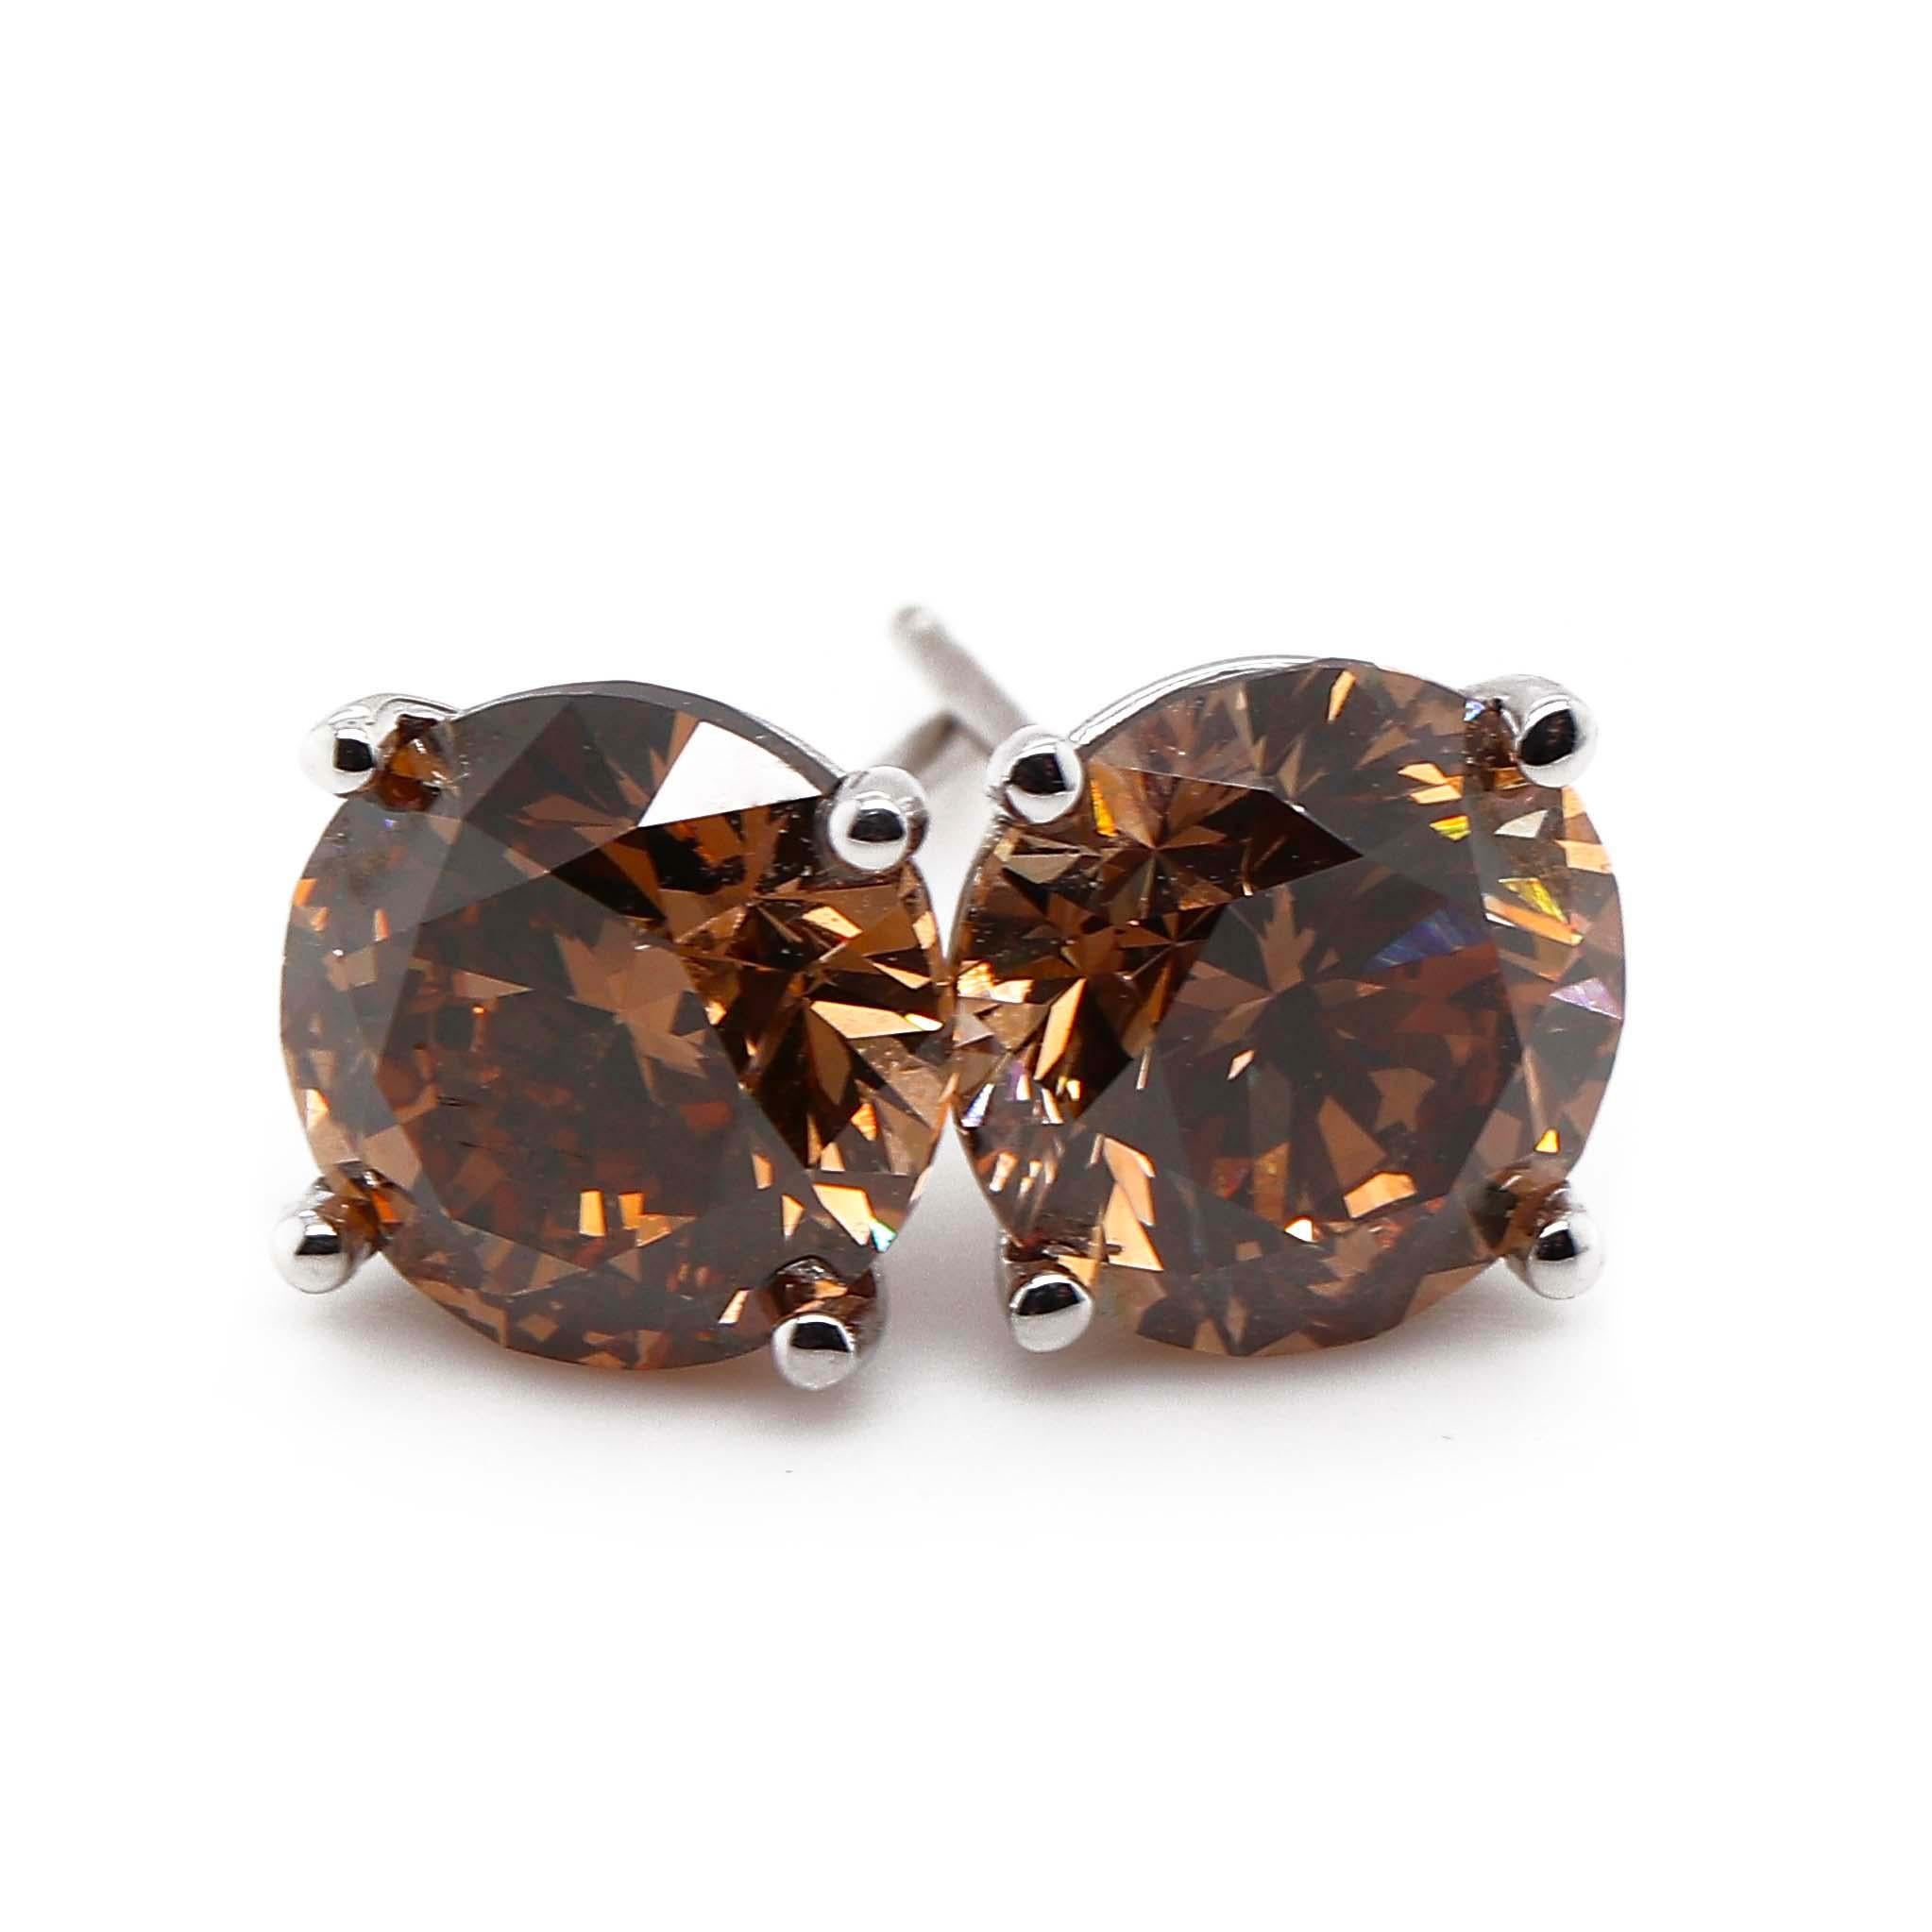 Natural and Fancy 2 Round Diamonds of about 4.00 carats Clarity SI2, I1 and Color Fancy Yellow Brown, Fancy Dark Orangy Brown. Both diamonds are GIA certified (GIA2221382978  GIA2225382975) and are set in a 14k white gold setting. Total weight of